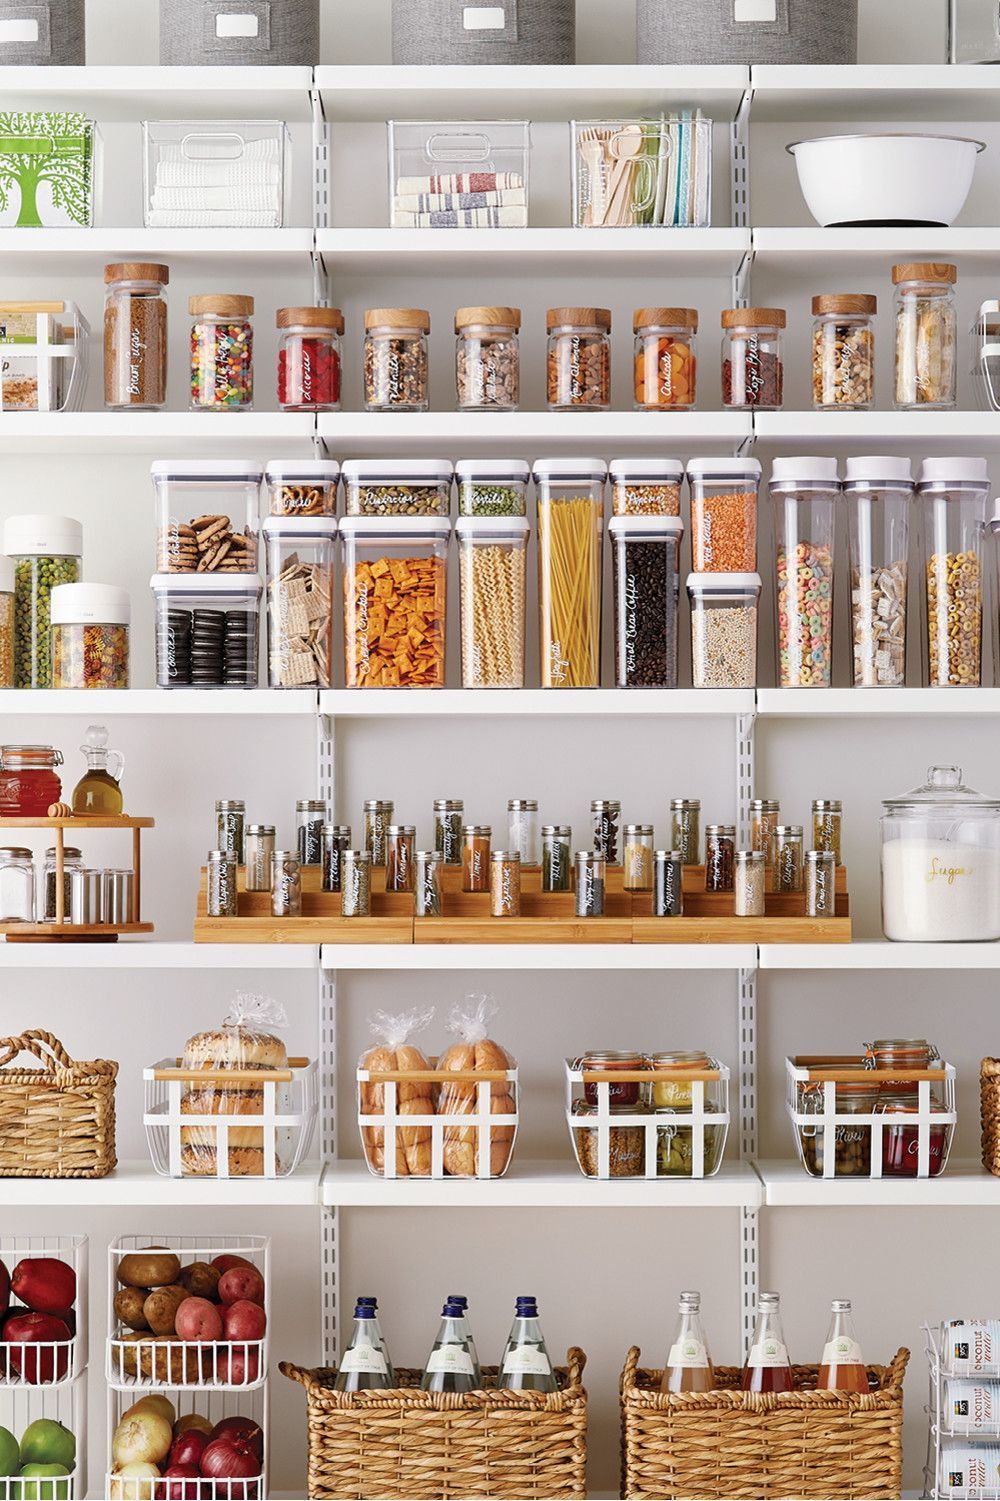 https://hitherandthither.net/wp-content/uploads/2019/02/Container-Store-Pantry.jpg